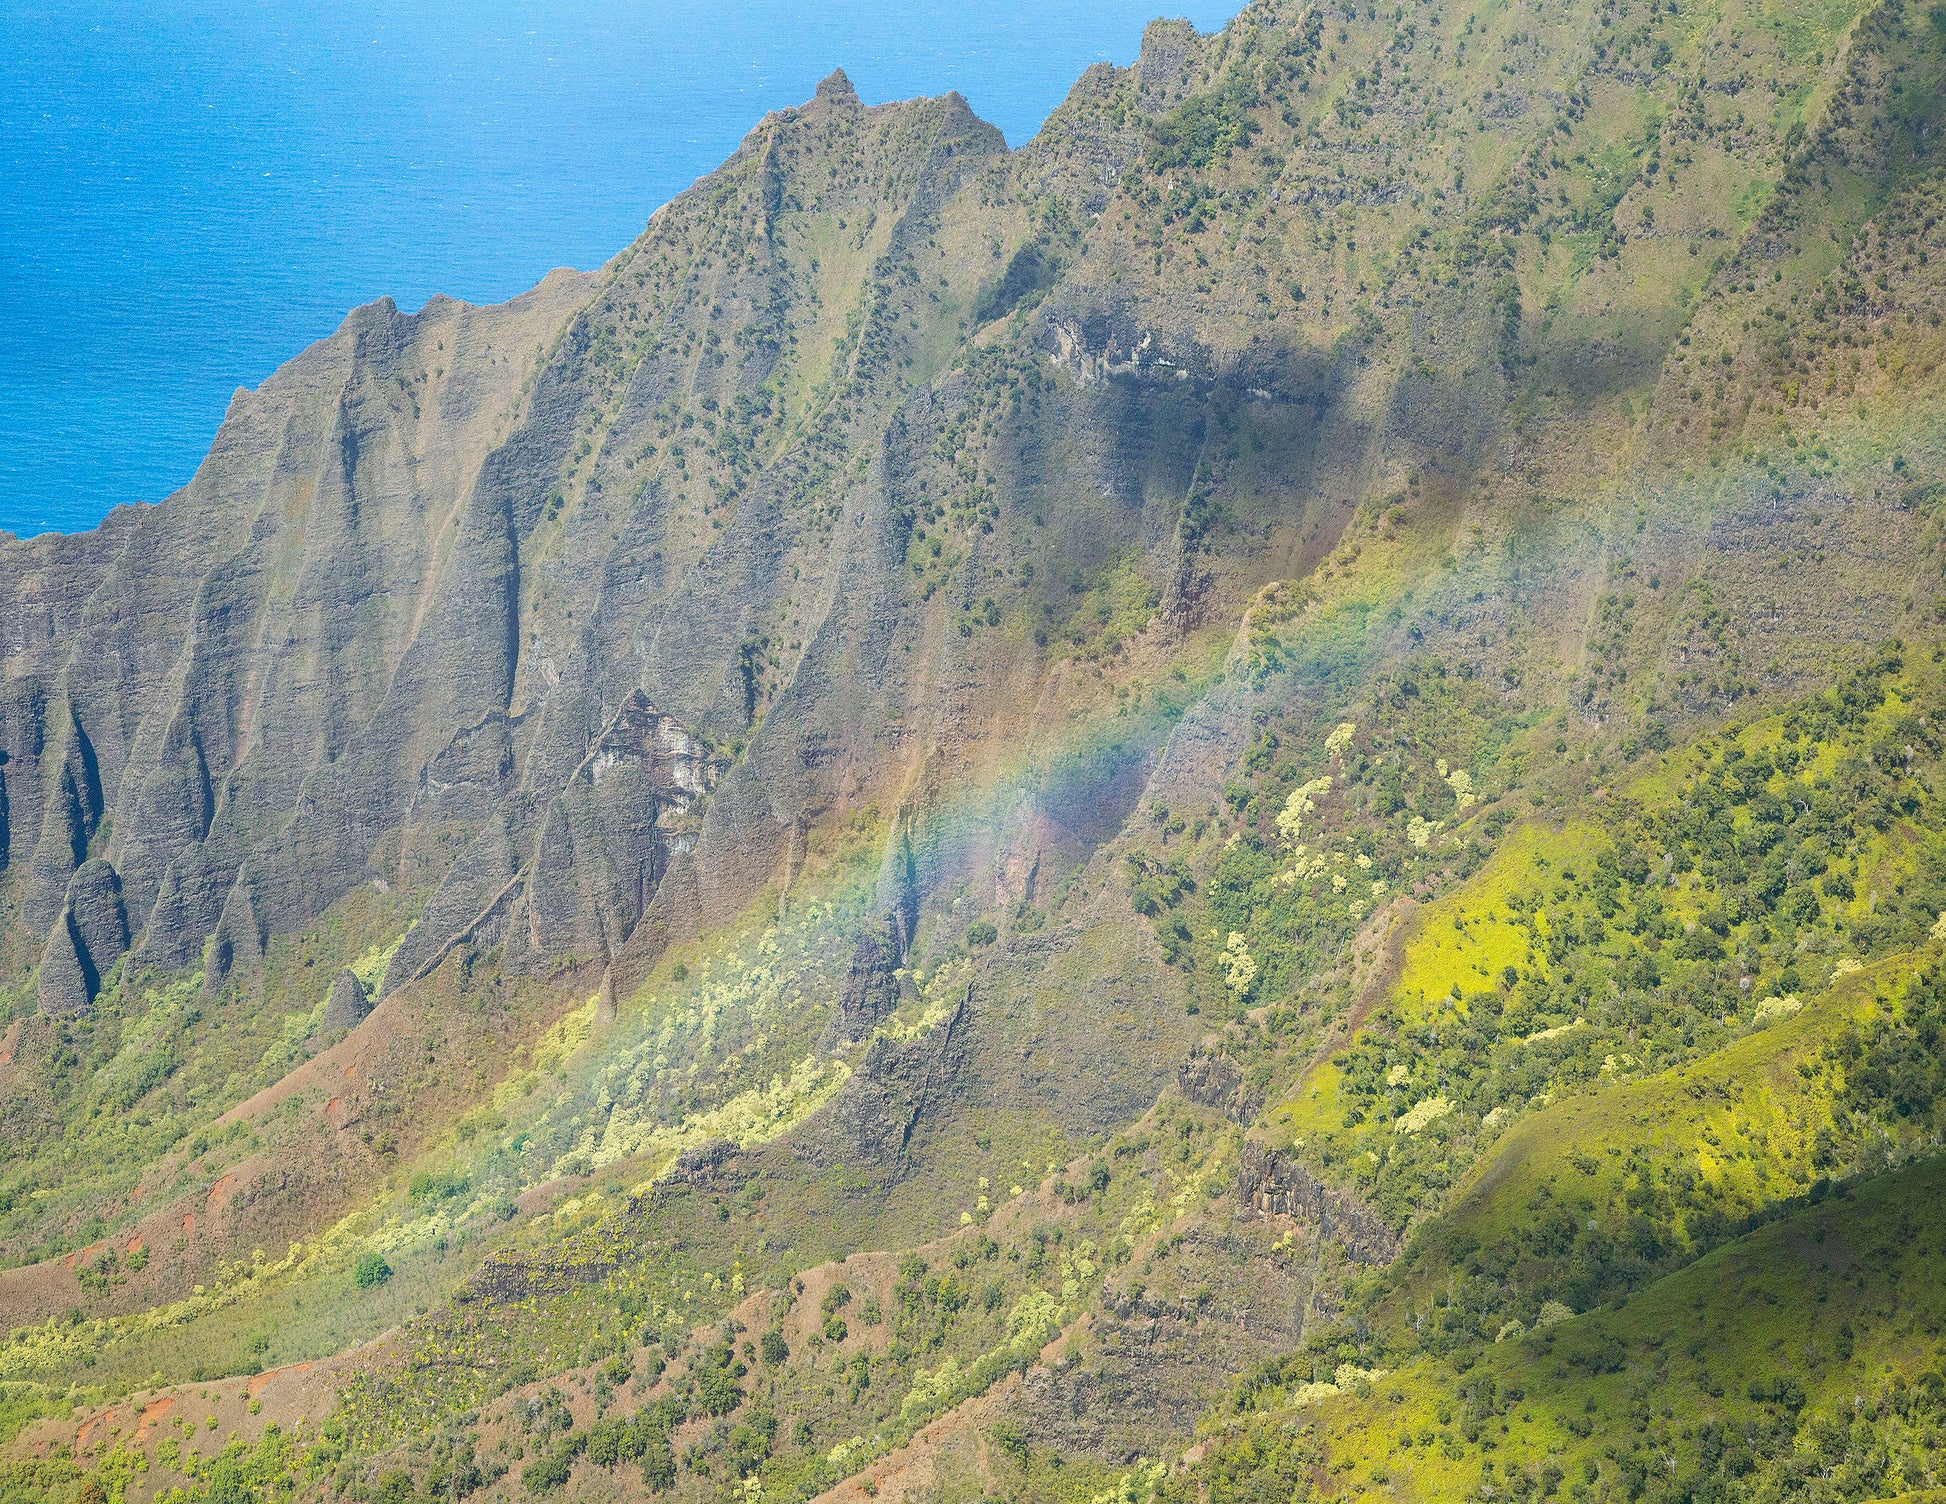 A rainbow stretches in front of a close up shot of Kalalau Valley’s cliffs. Fine art photograph by Kauai outdoor and landscape photographers Inspiring Images Hawaii.